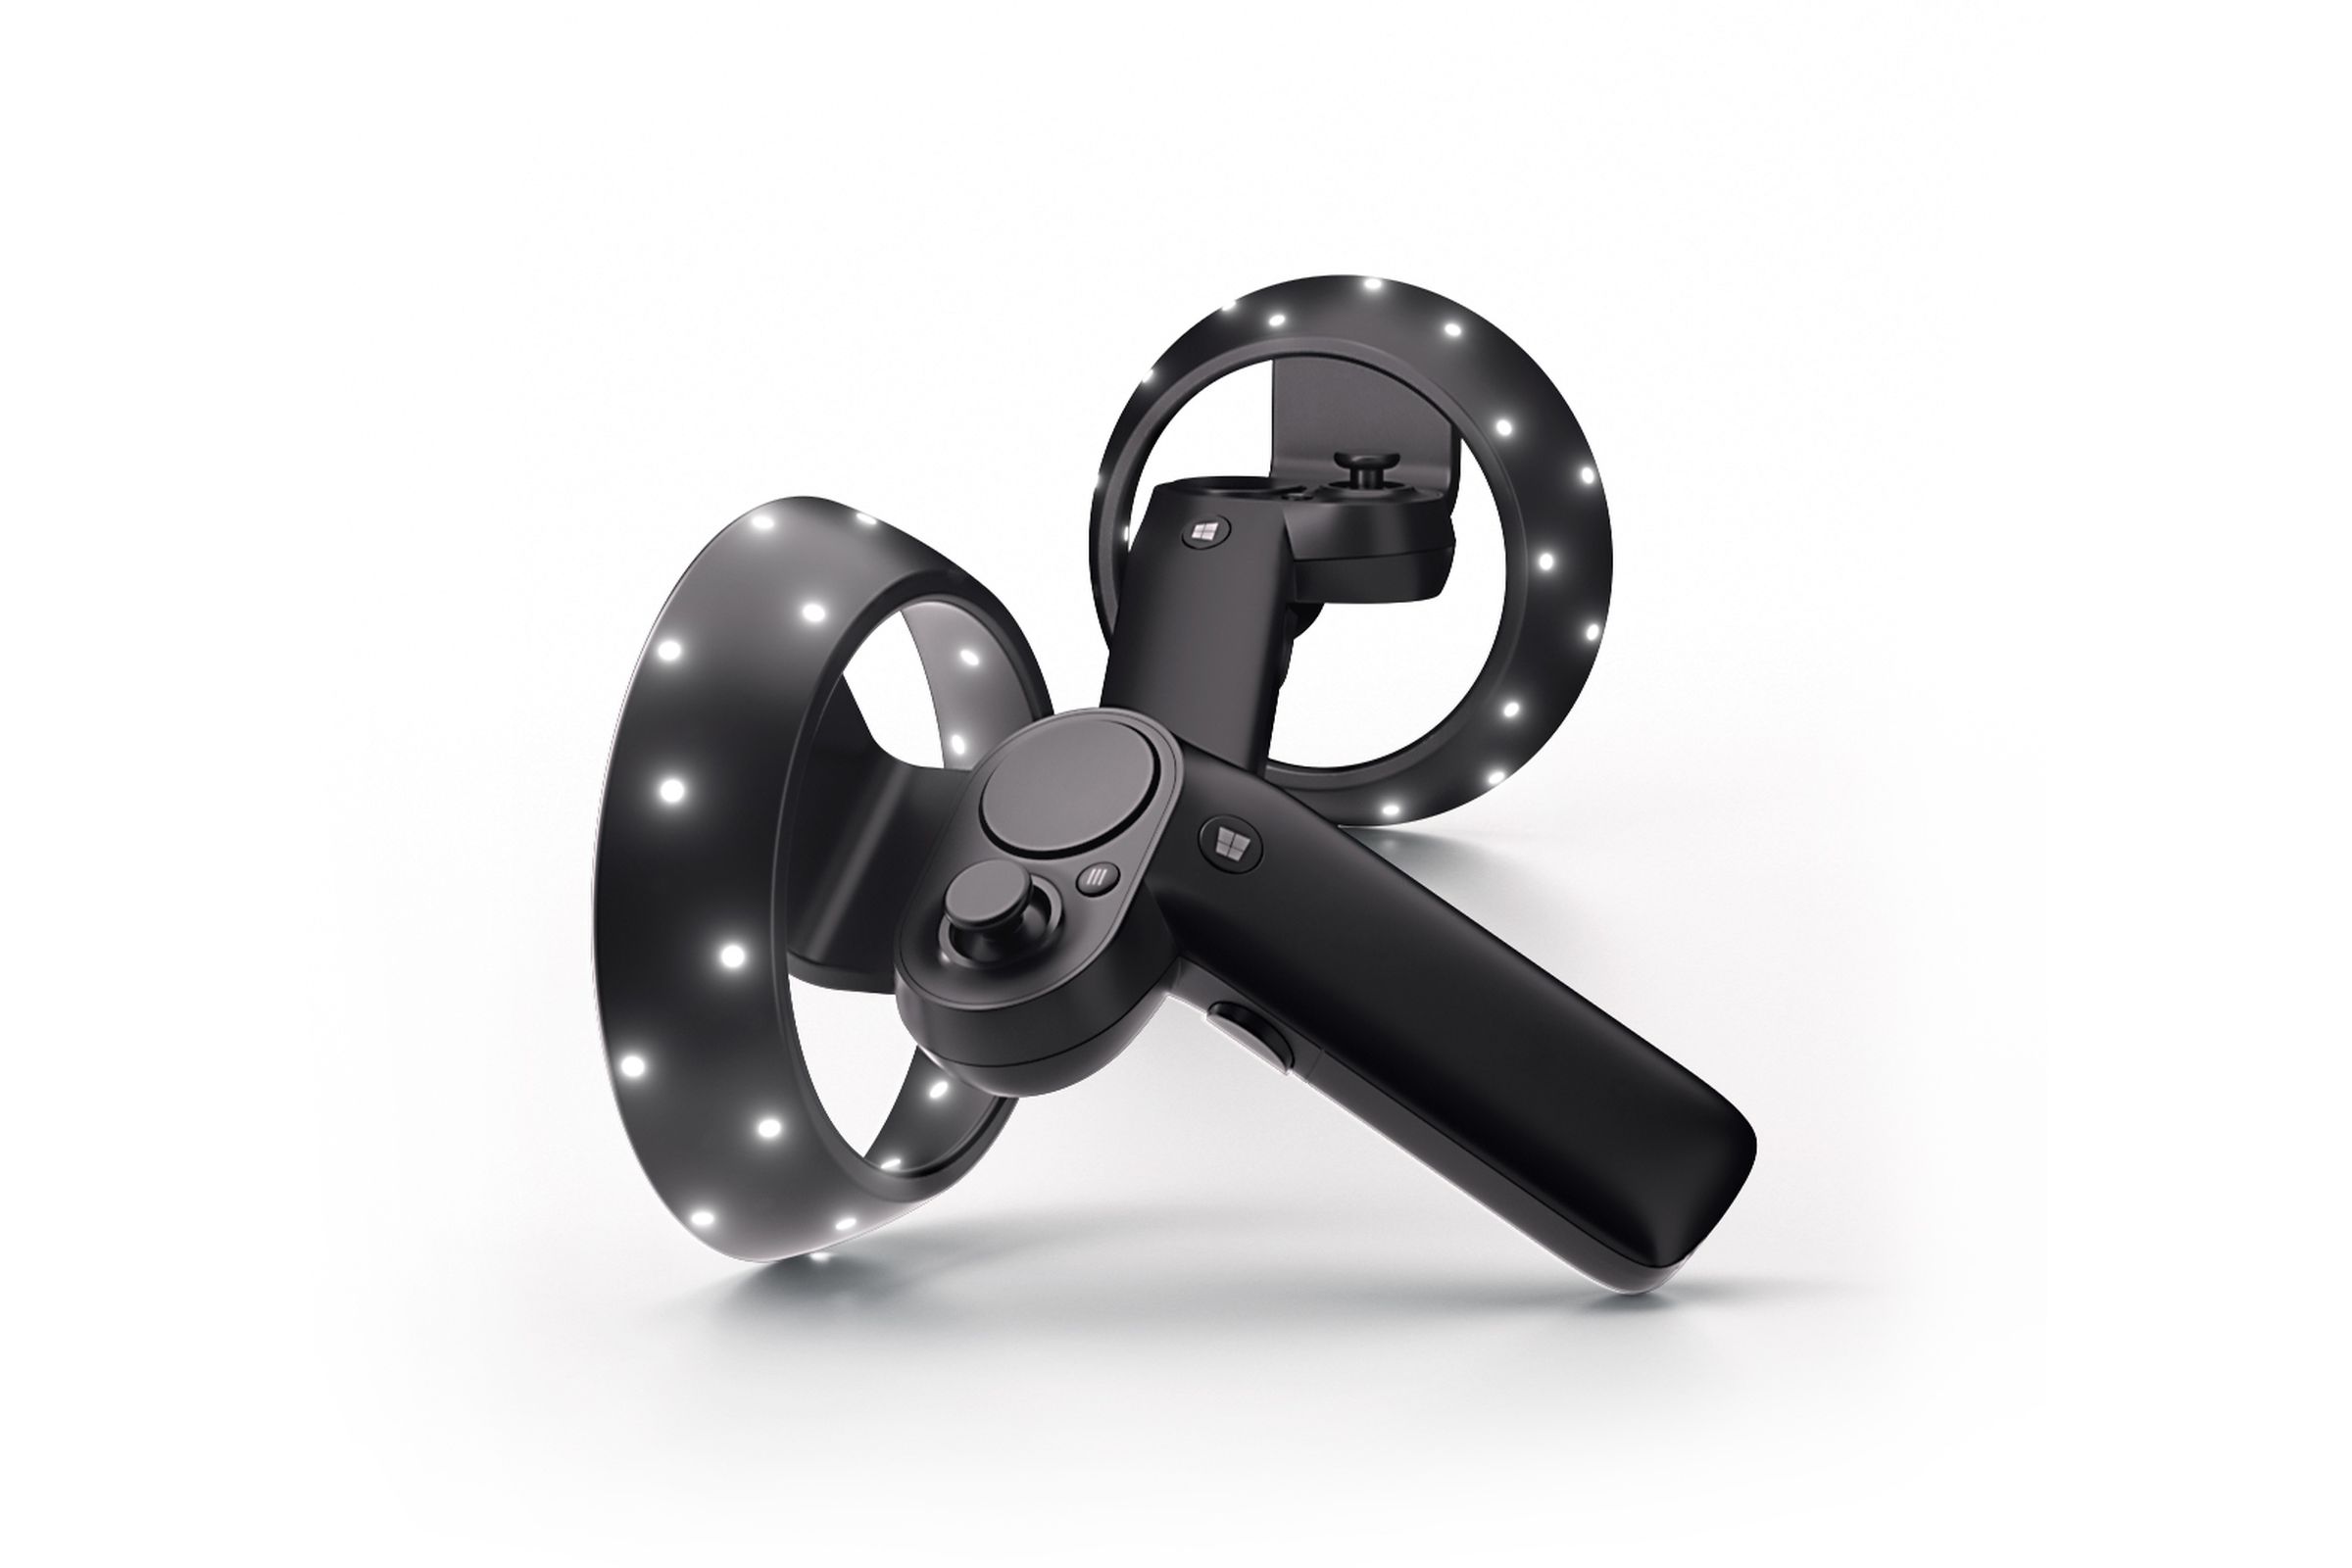 Windows Mixed Reality controllers